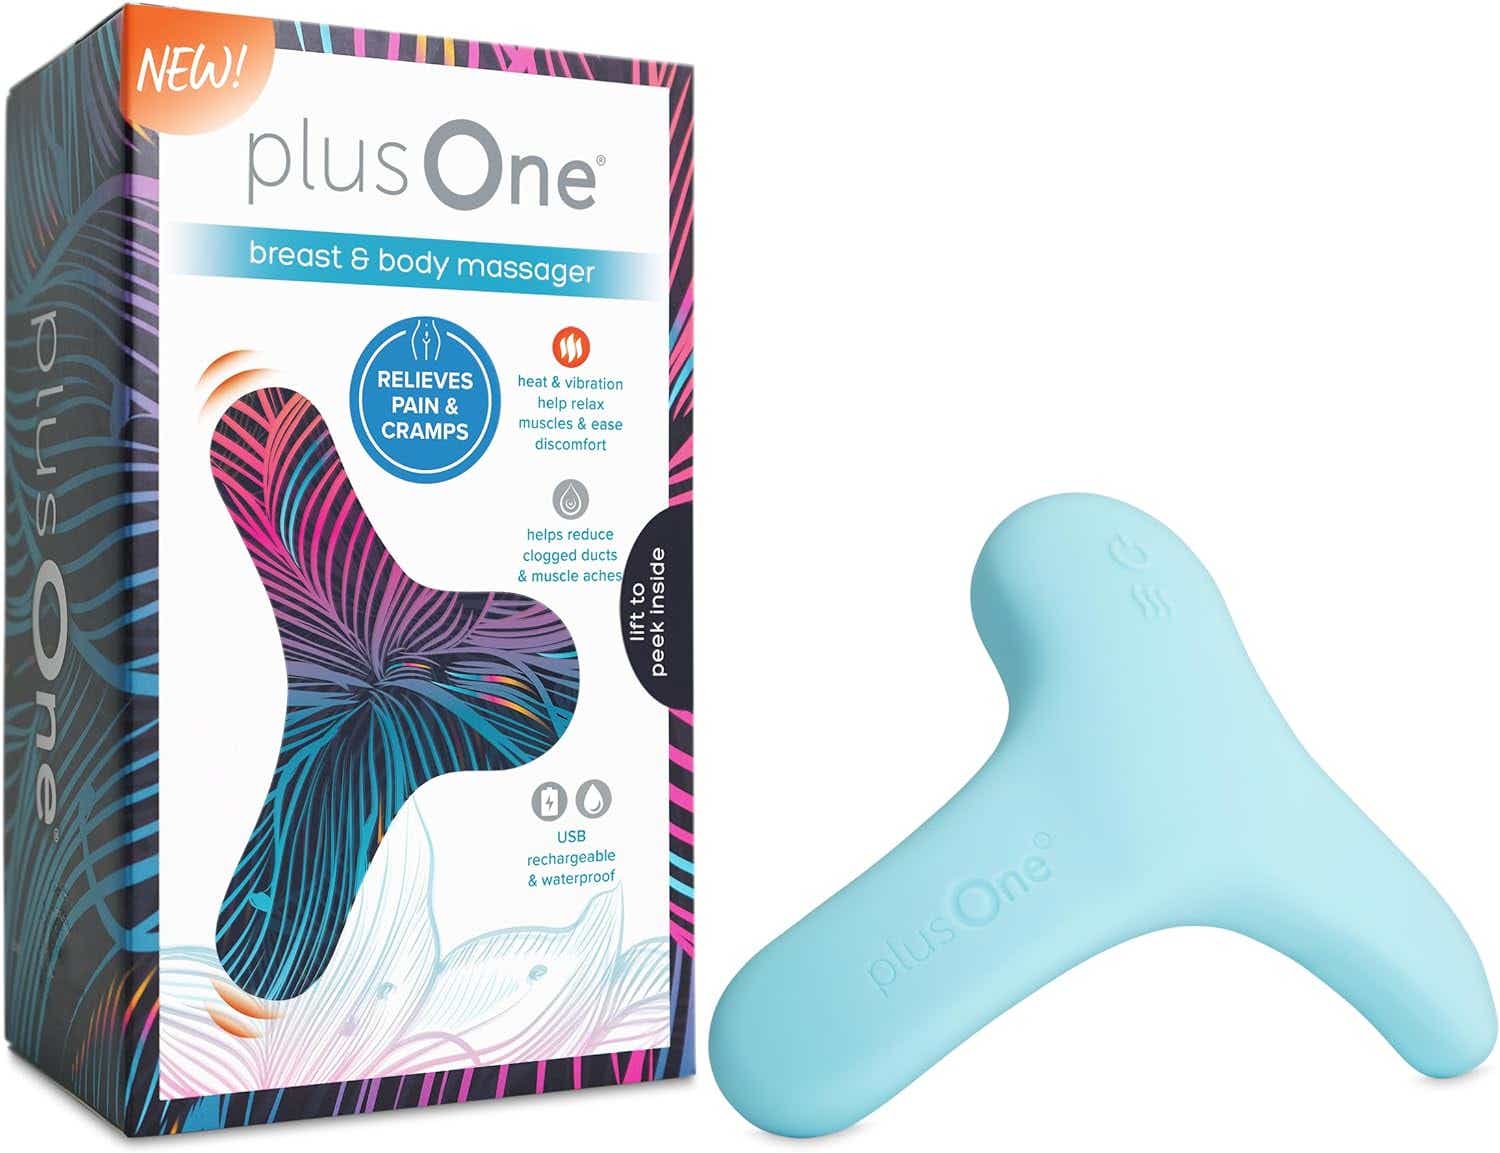 plusOne Breast & Body Massager - Breast Massager Device to Aid in Lactation and Duct-Clogging Prevention Plus Full Body Massaging - Hands-Free with 5...